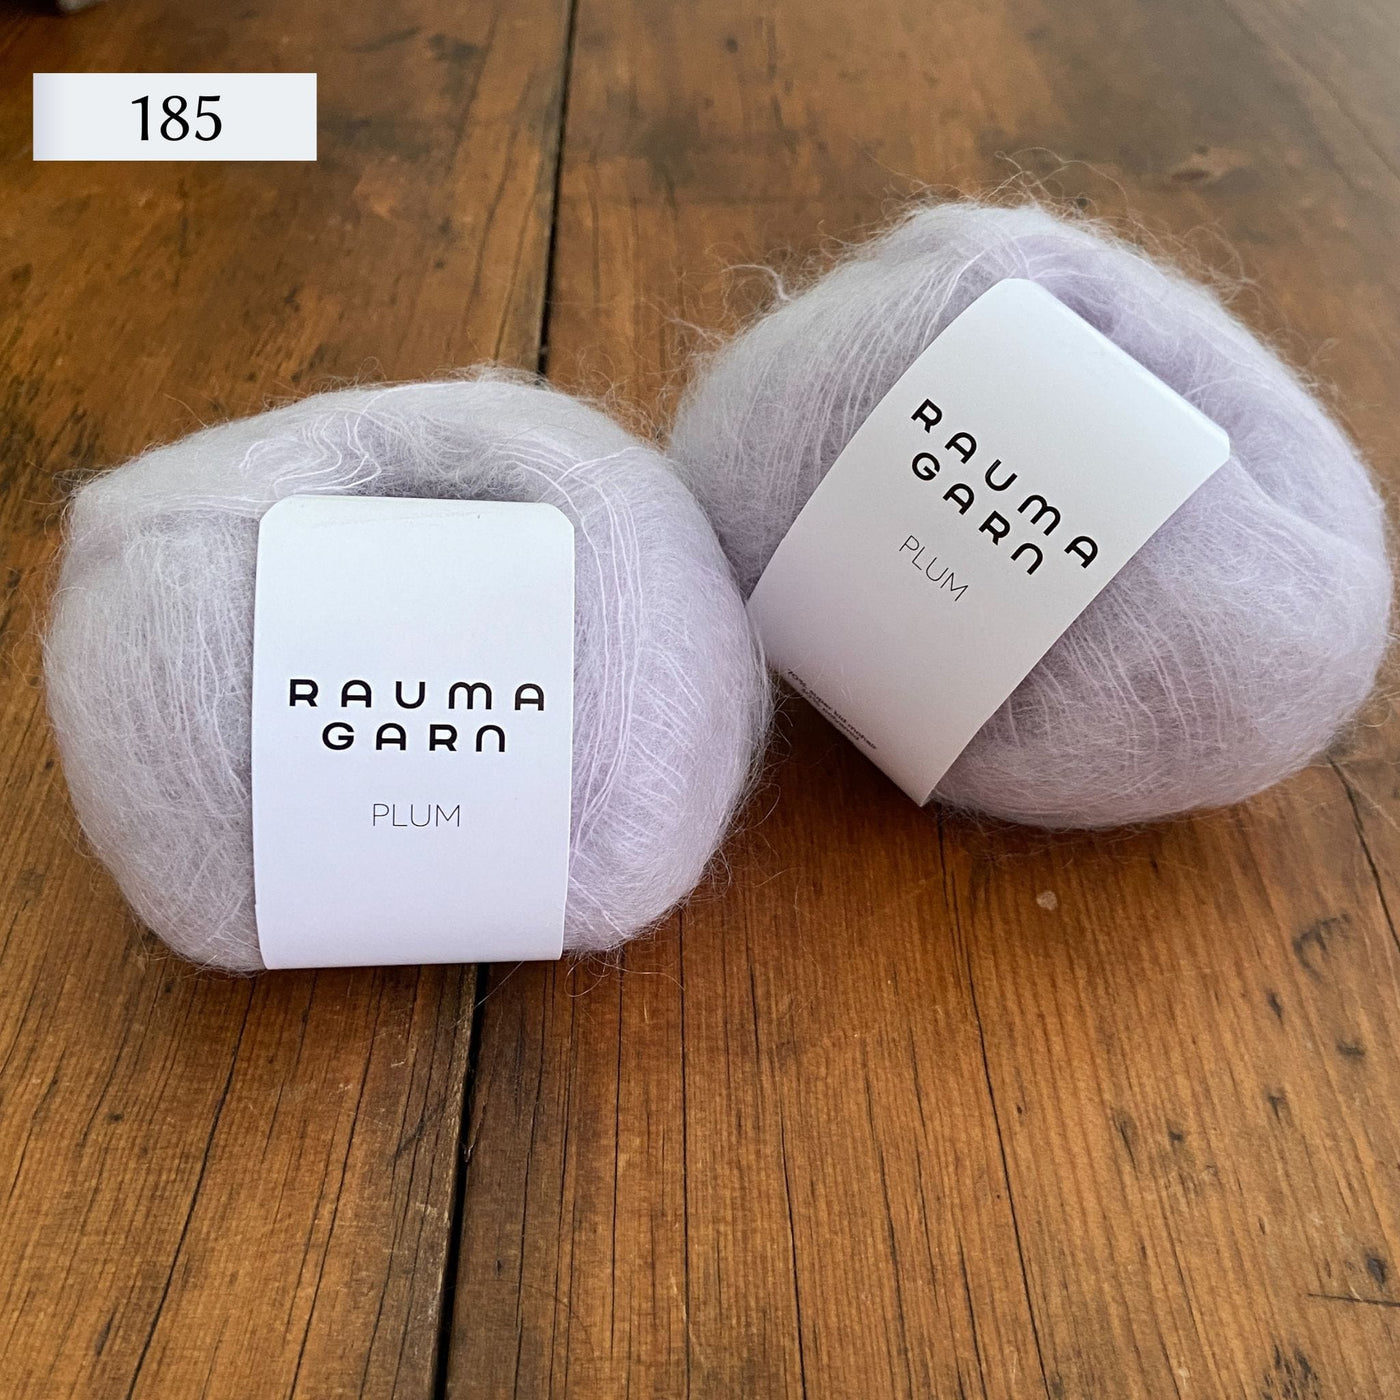 Two balls of Rauma Plum, a laceweight mohair blend yarn, in color 185, a very light lavender/cream